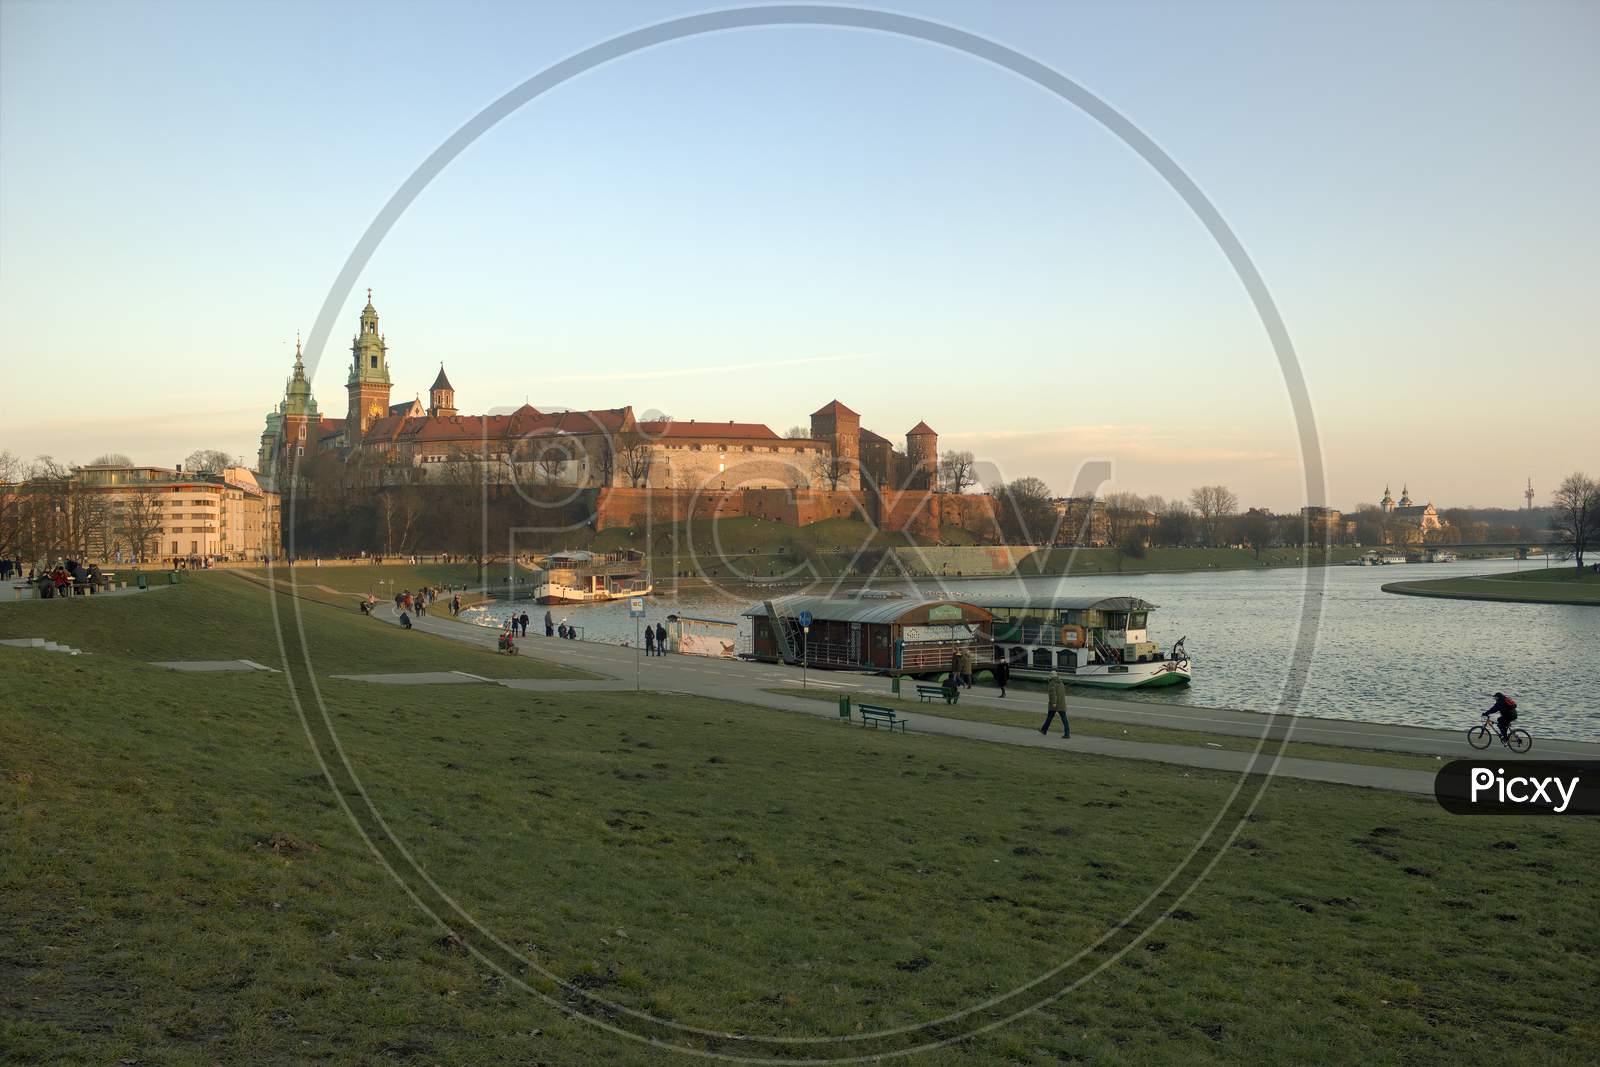 Krakow, Poland - February 21, 2015: Wide Angle View Of Wawel Castle By Vistula River And Restaurant Within Docked Ship